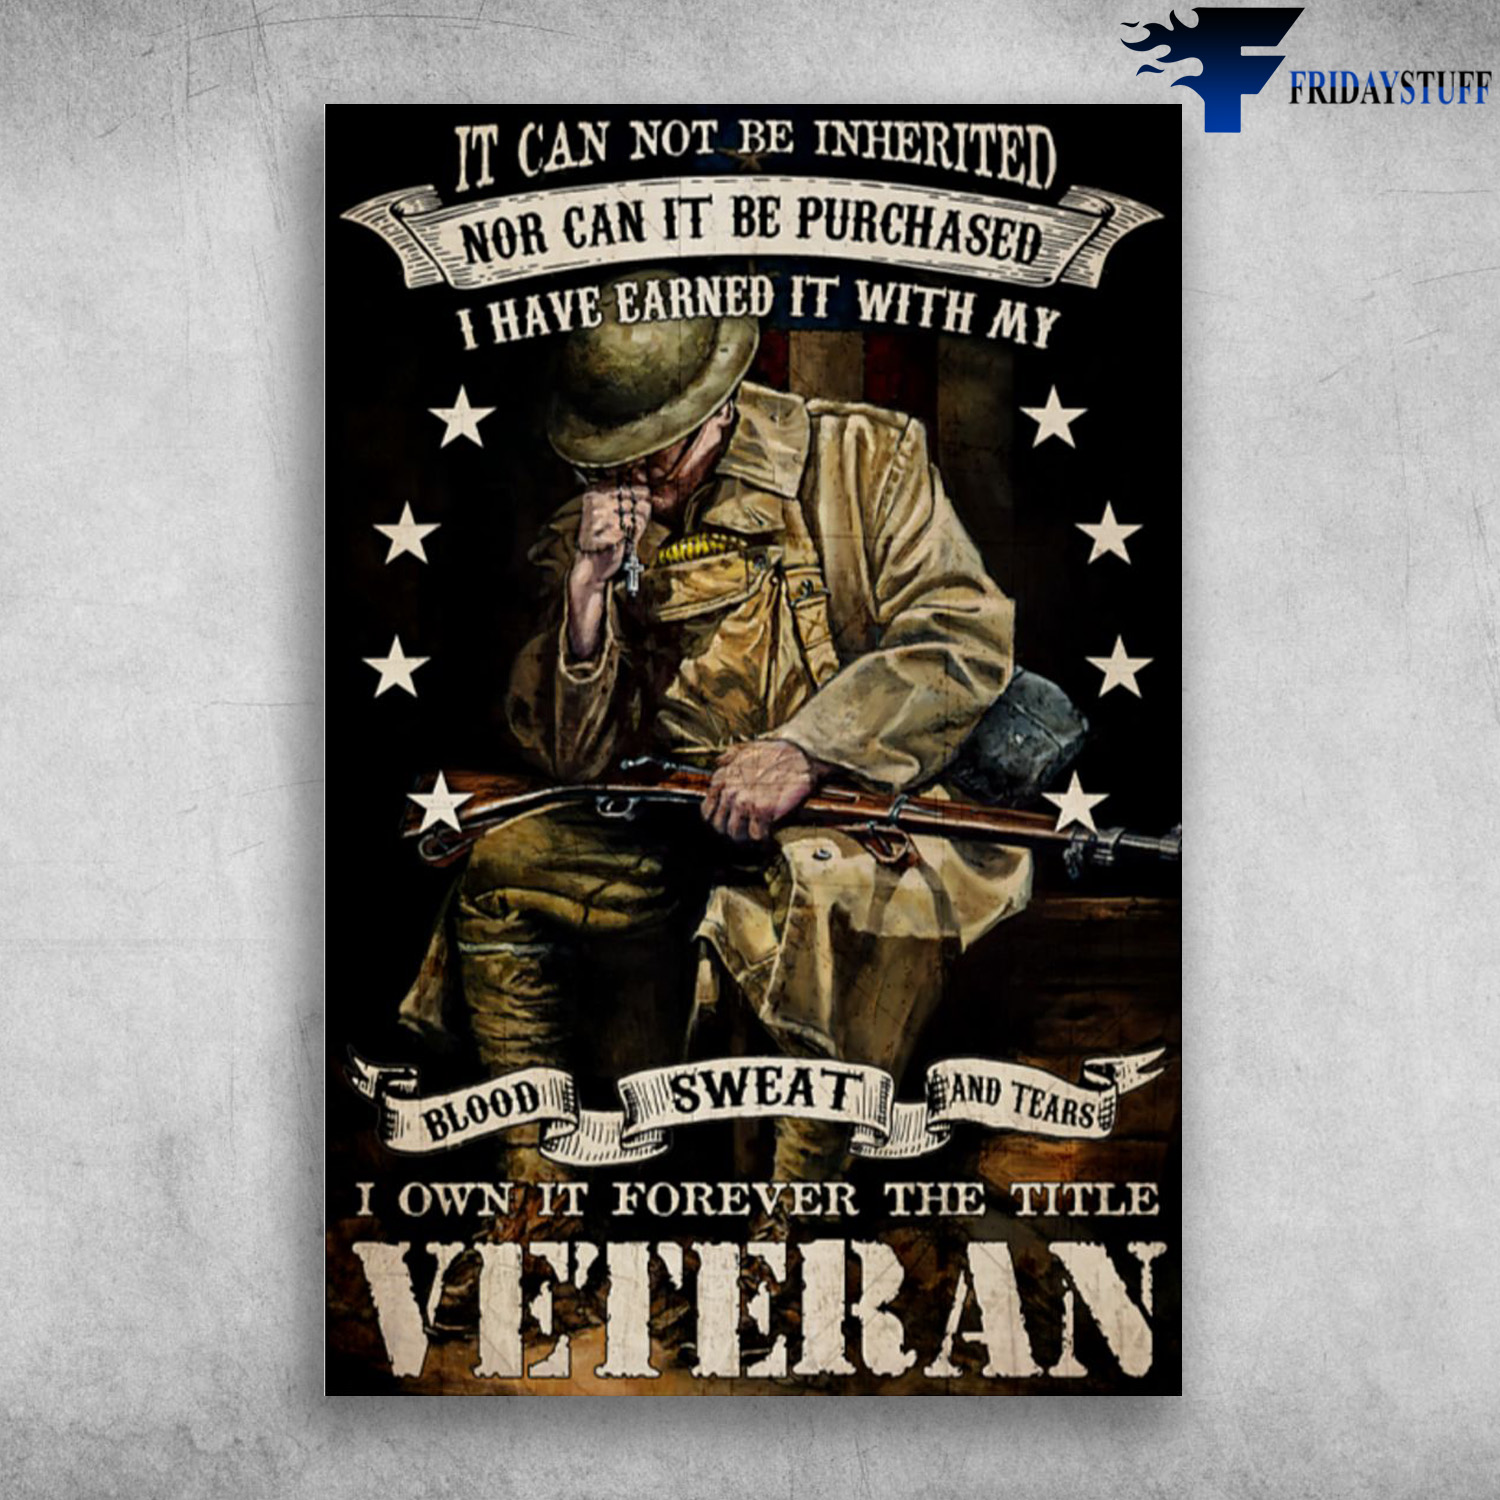 American Veteran - It Can Not Be Inherited, Nor Can It Be Purchased, I Have Earned It With My Blood, Sweat And Tears, I Own It Forever The Title Veteran